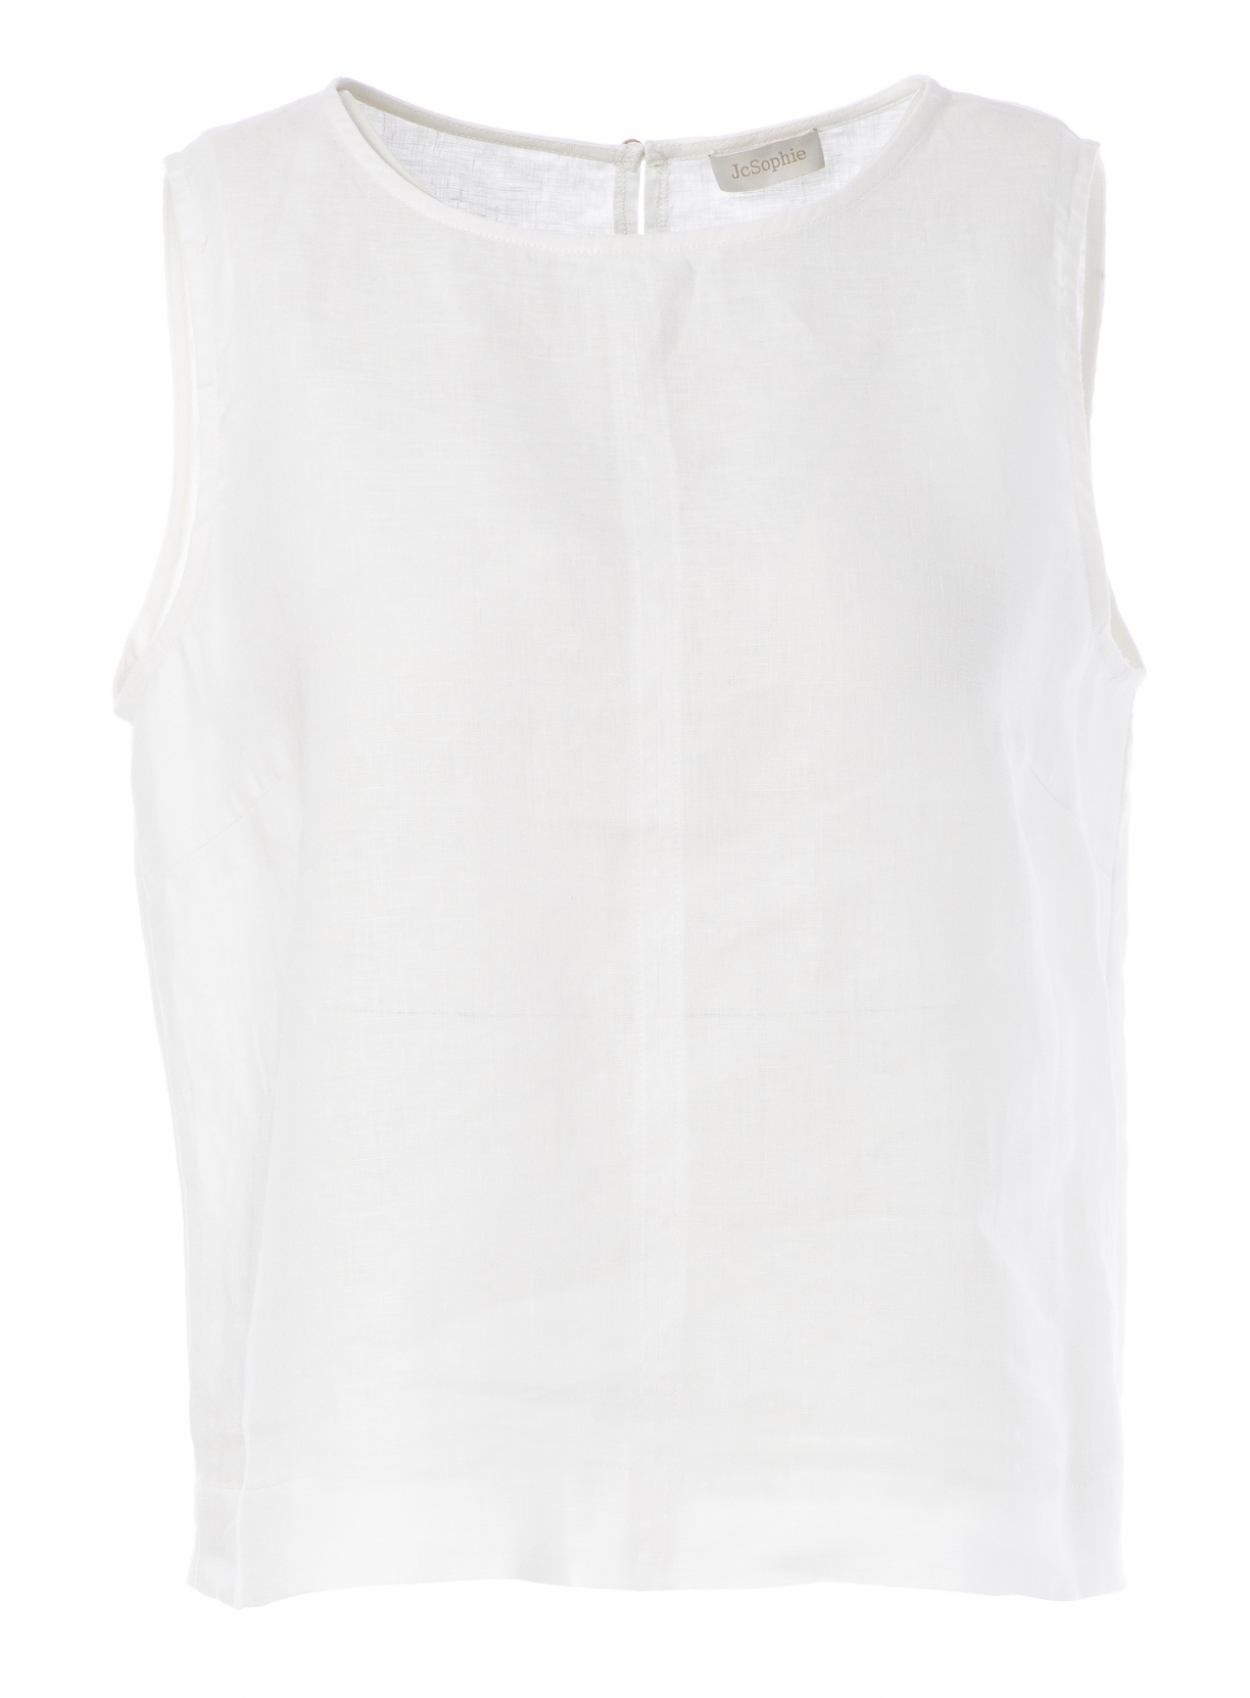 JC Sophie  Channing Blouse Off White